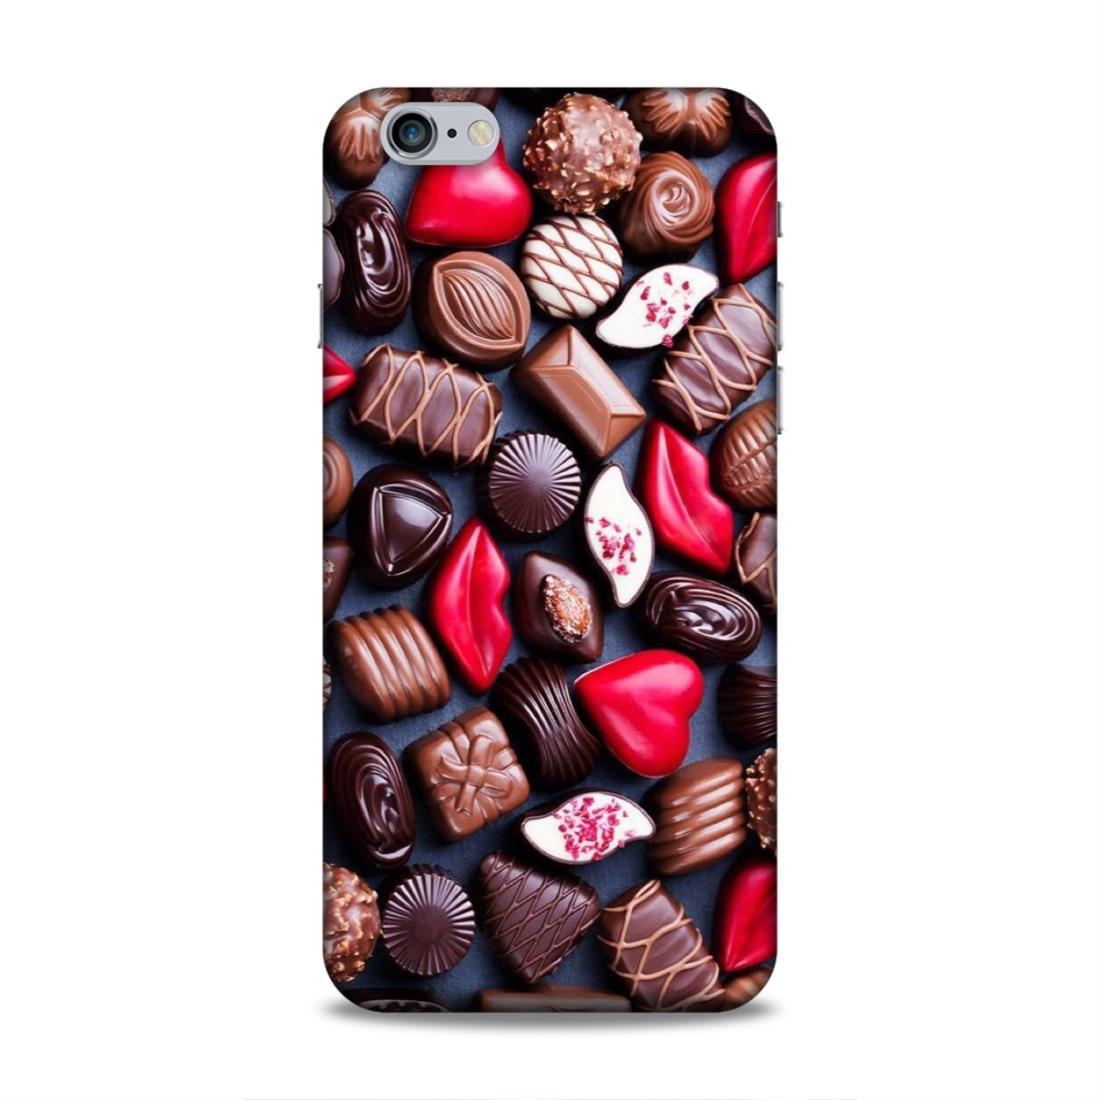 Chocolate Heart iPhone 6 Plus Phone Case Cover